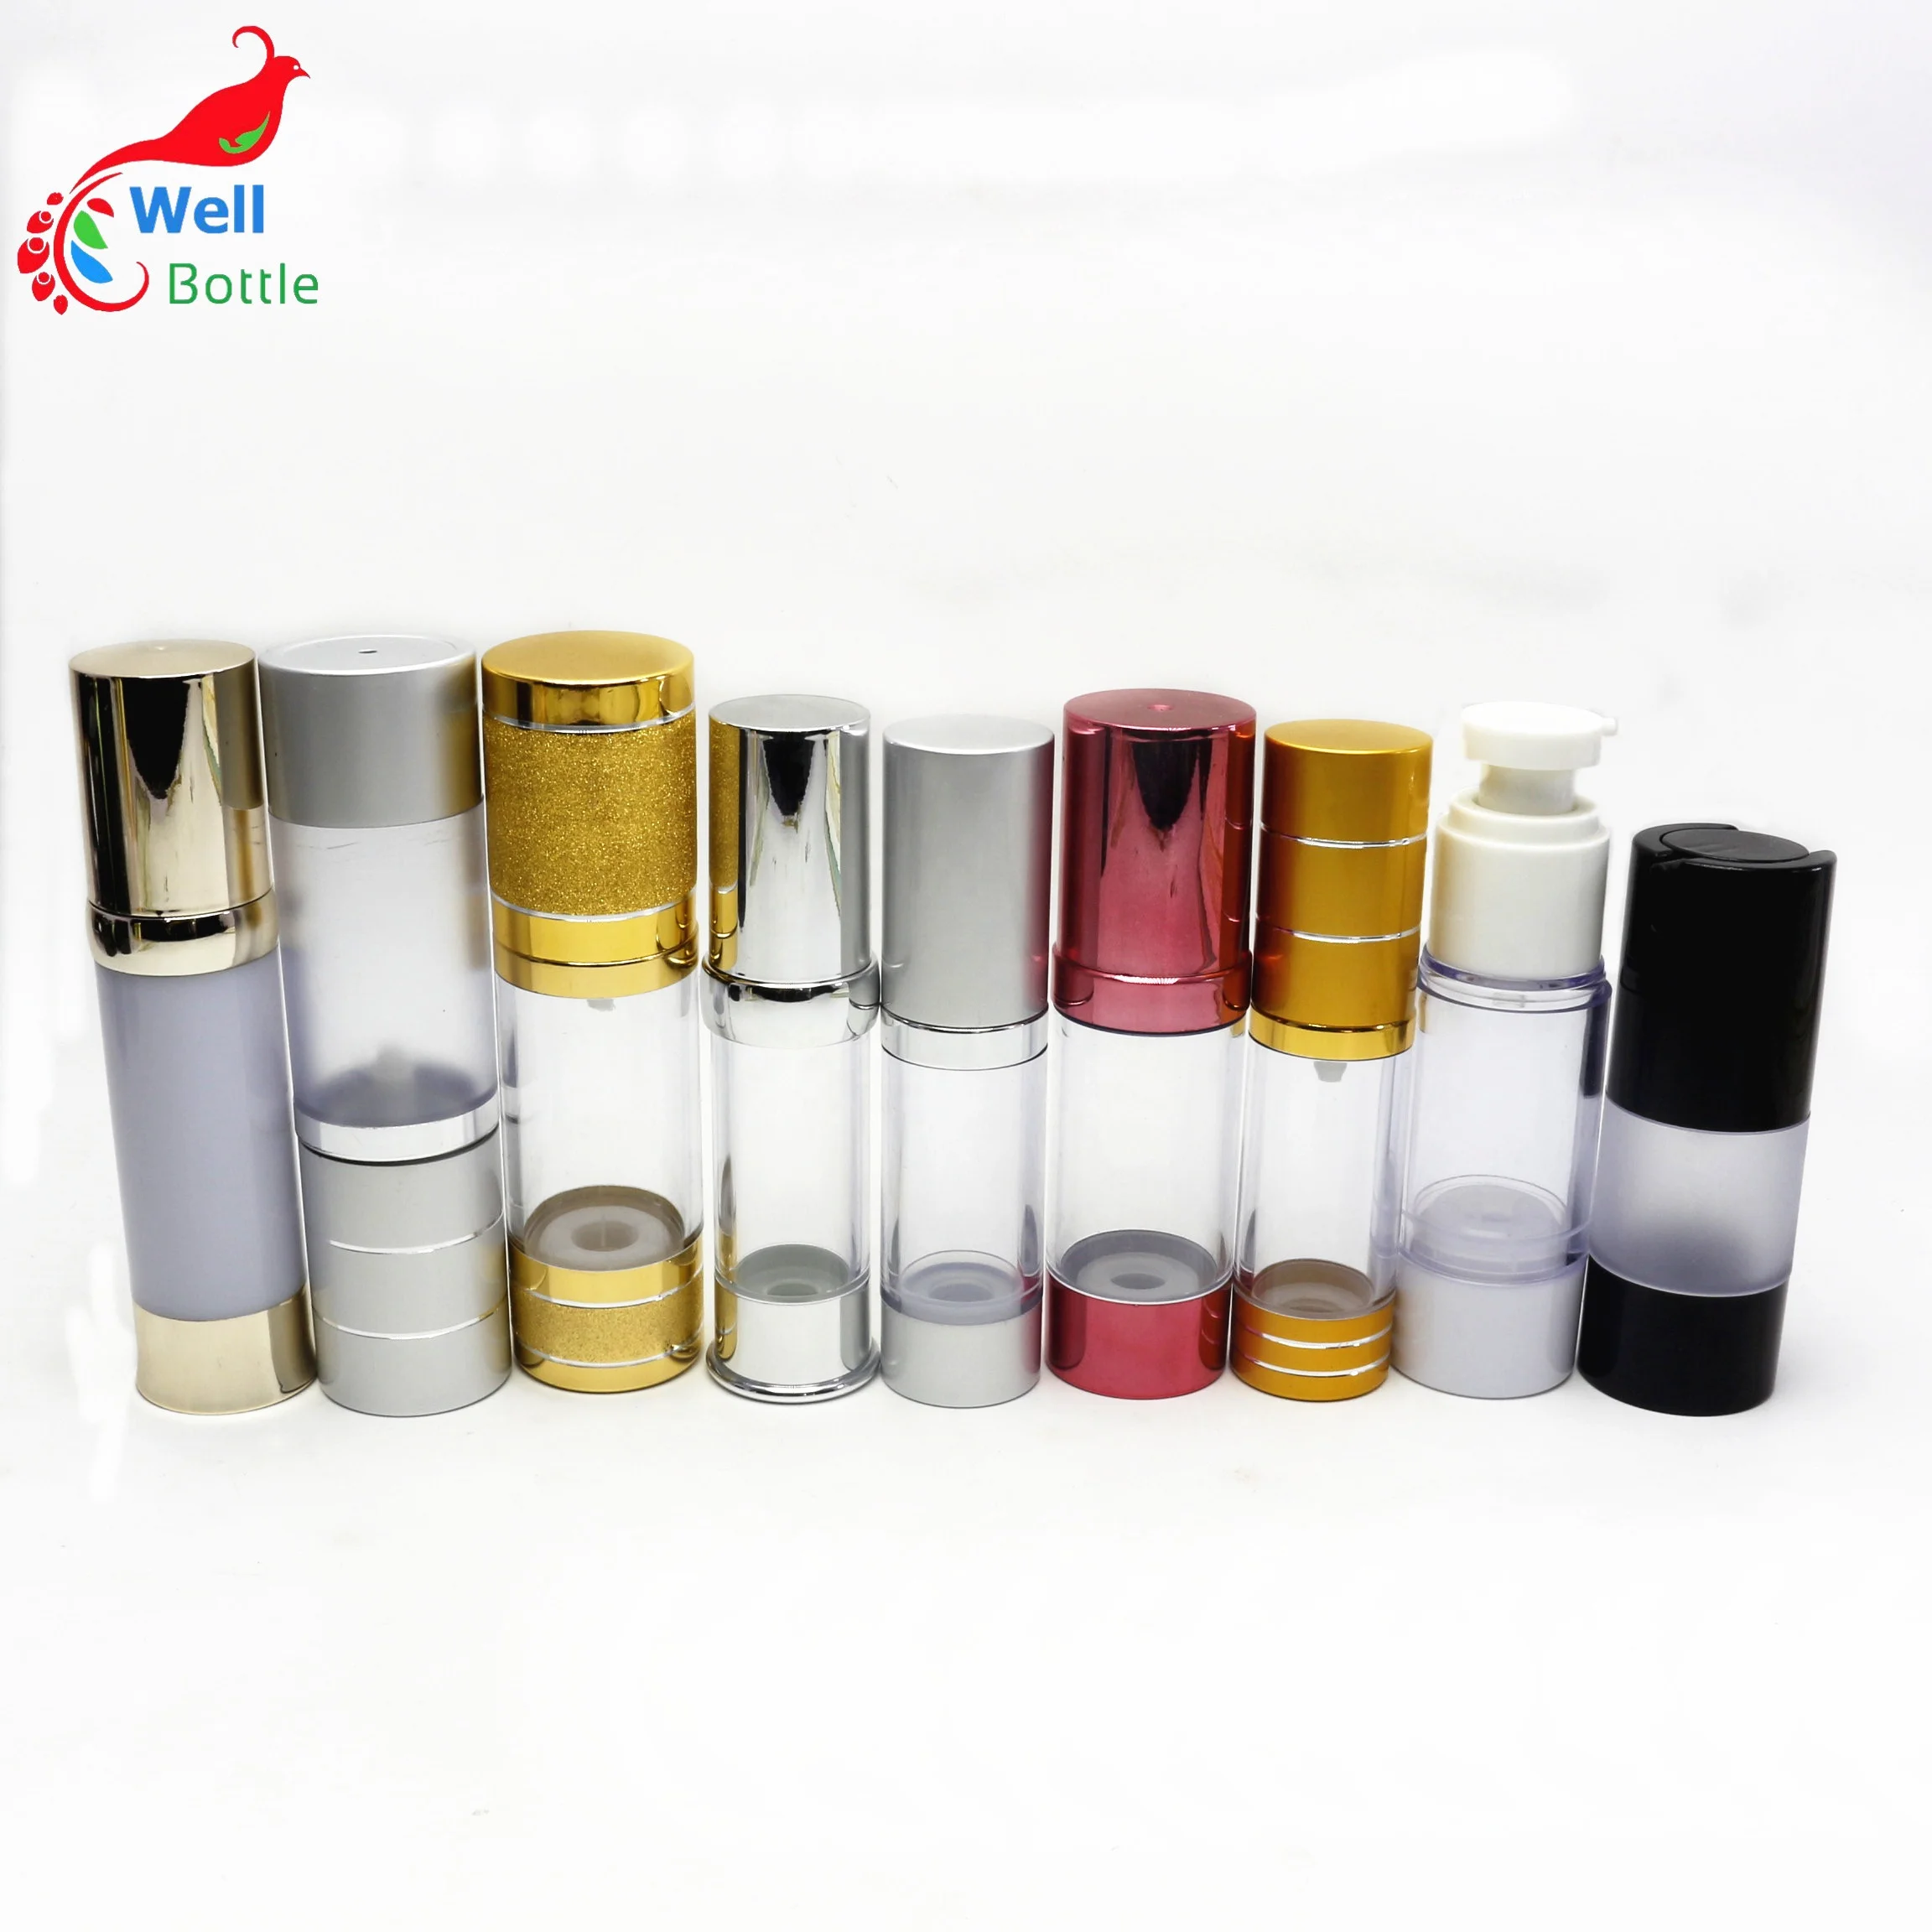 Wholesale High Quality Bamboo Airless Bottle Cosmetic packing Airless-040RL